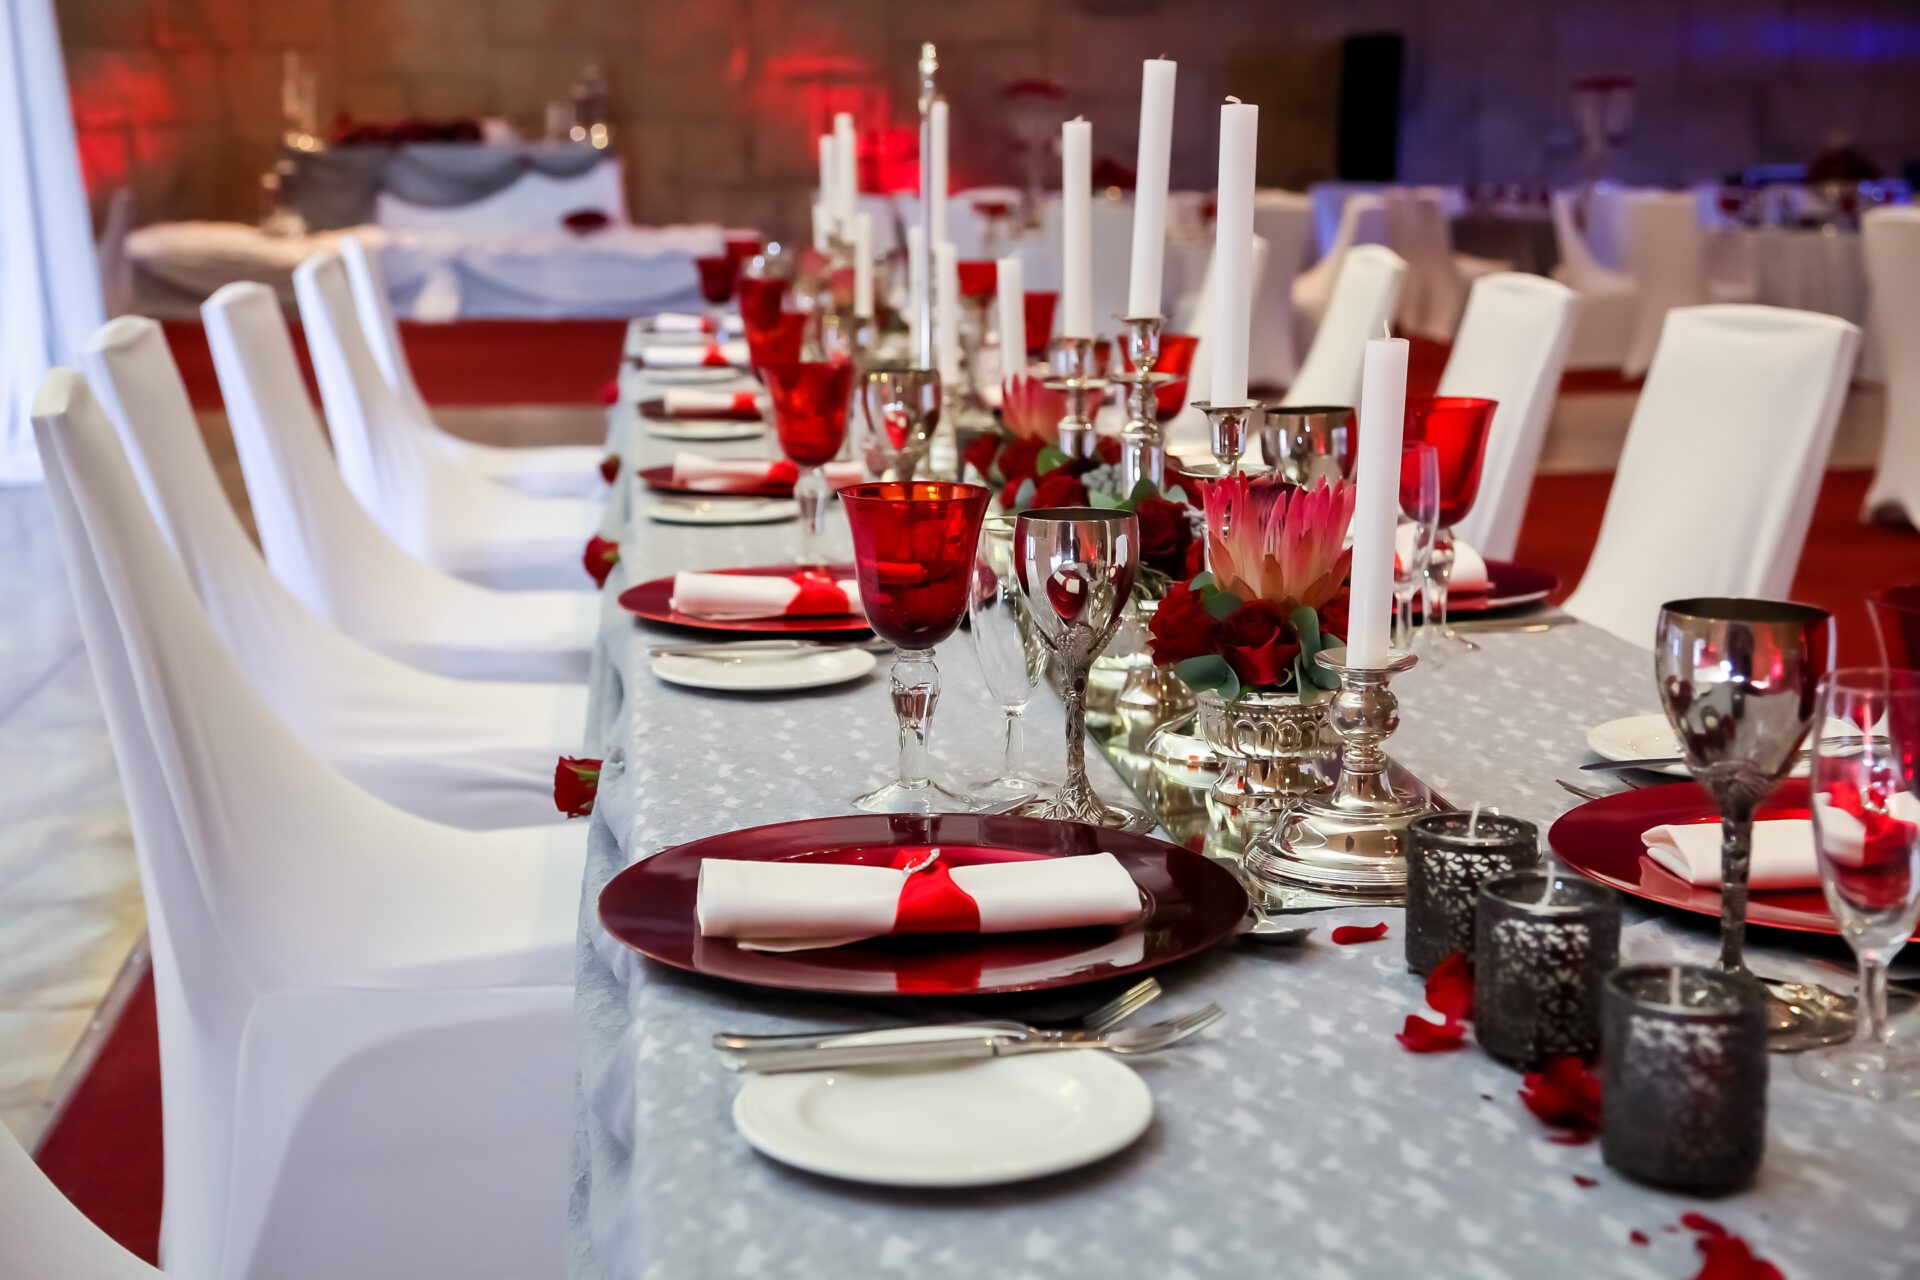 Red and White table setting for catering & decor purposes at corporate Christmas Gala Event Party